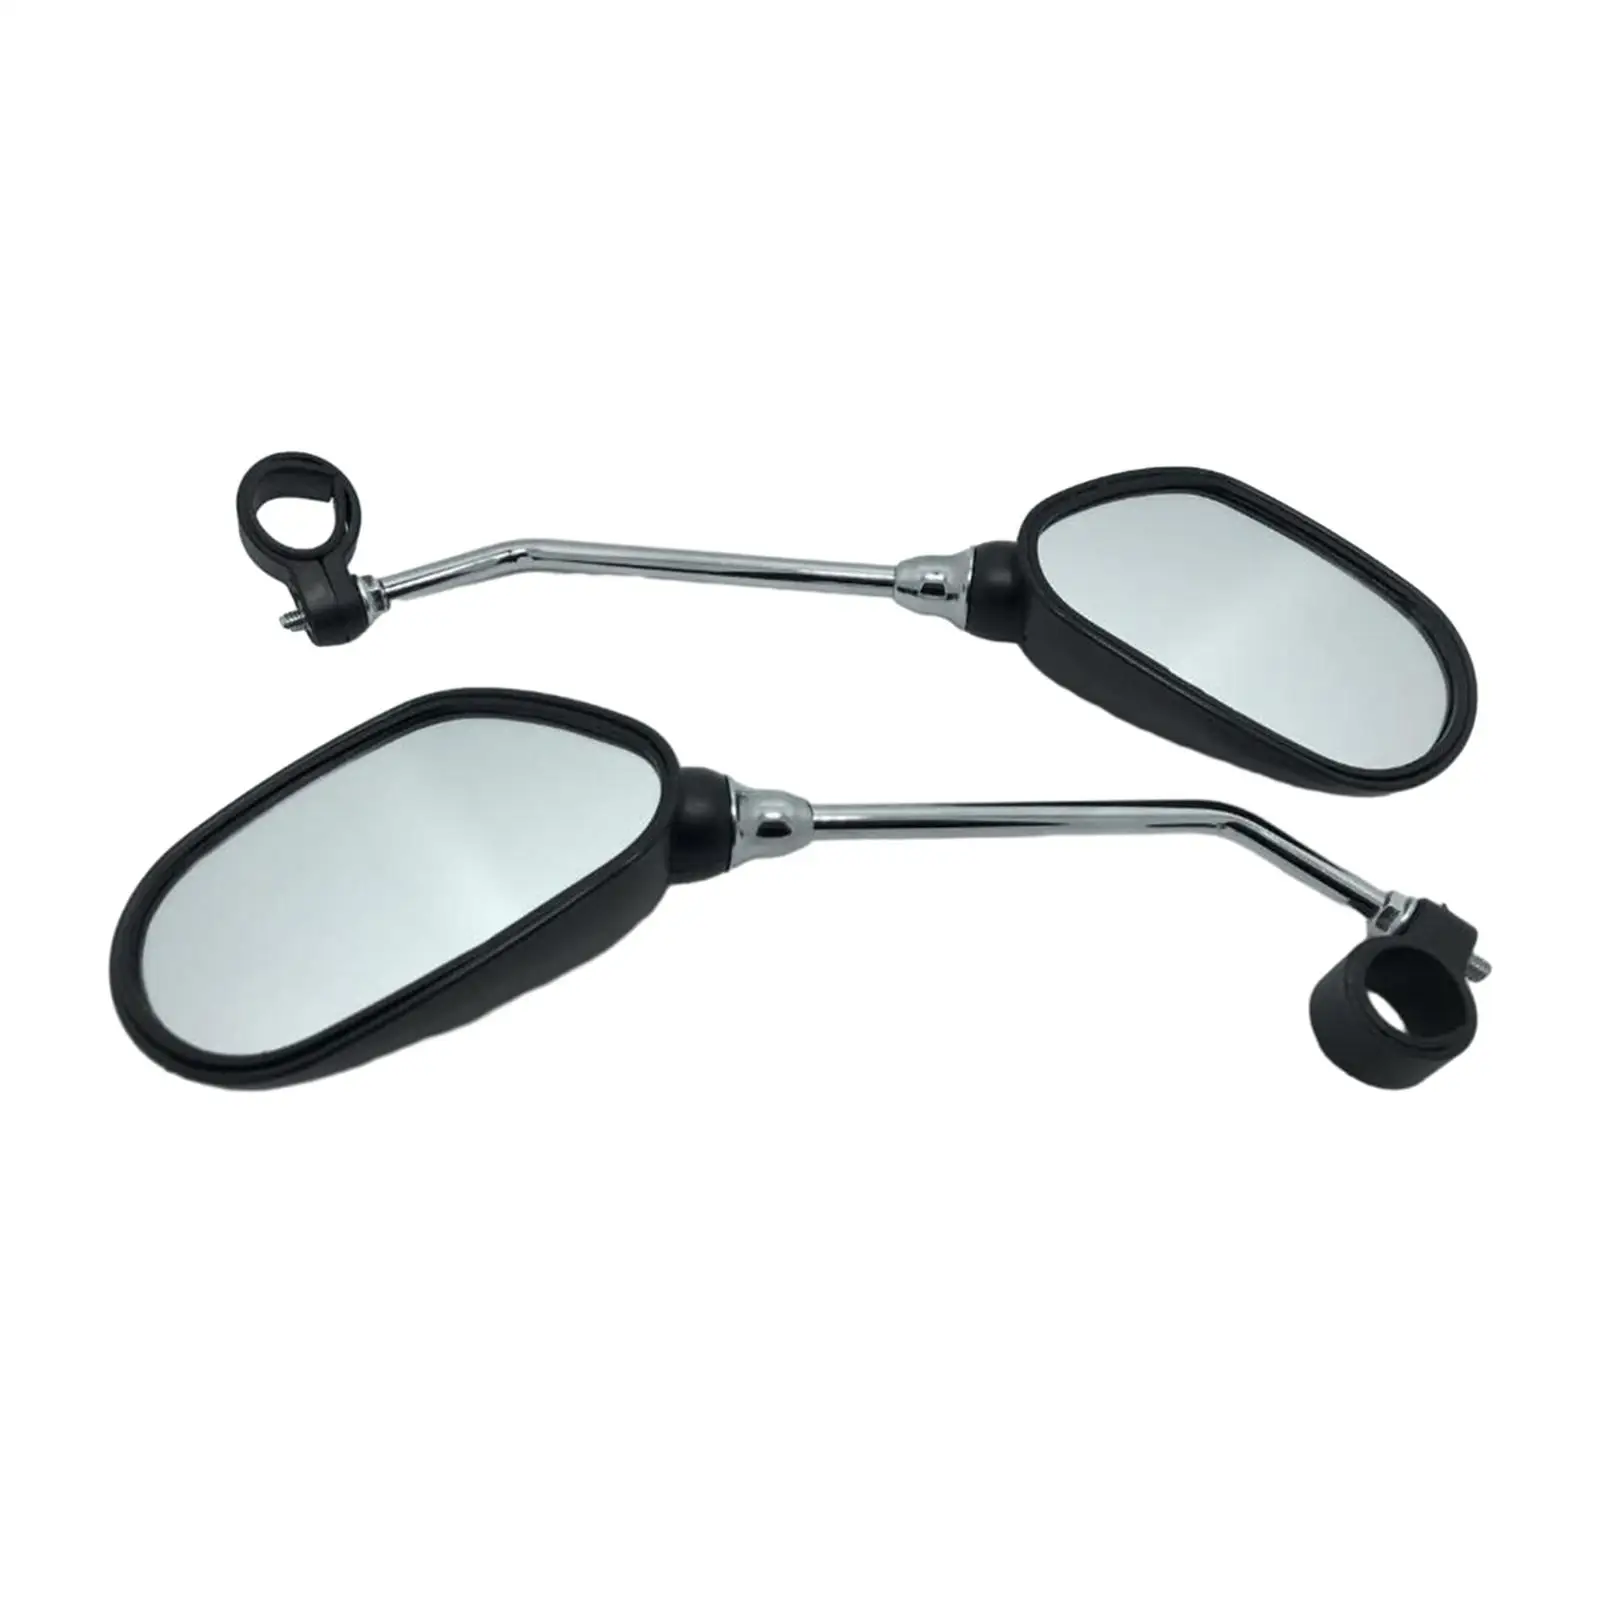 Bike Mirror Left and Right Safety Mirror Bicycle Rear View Mirror for Mountain Road Bike Motorcycle Electric Bicycle 2Pcs Black